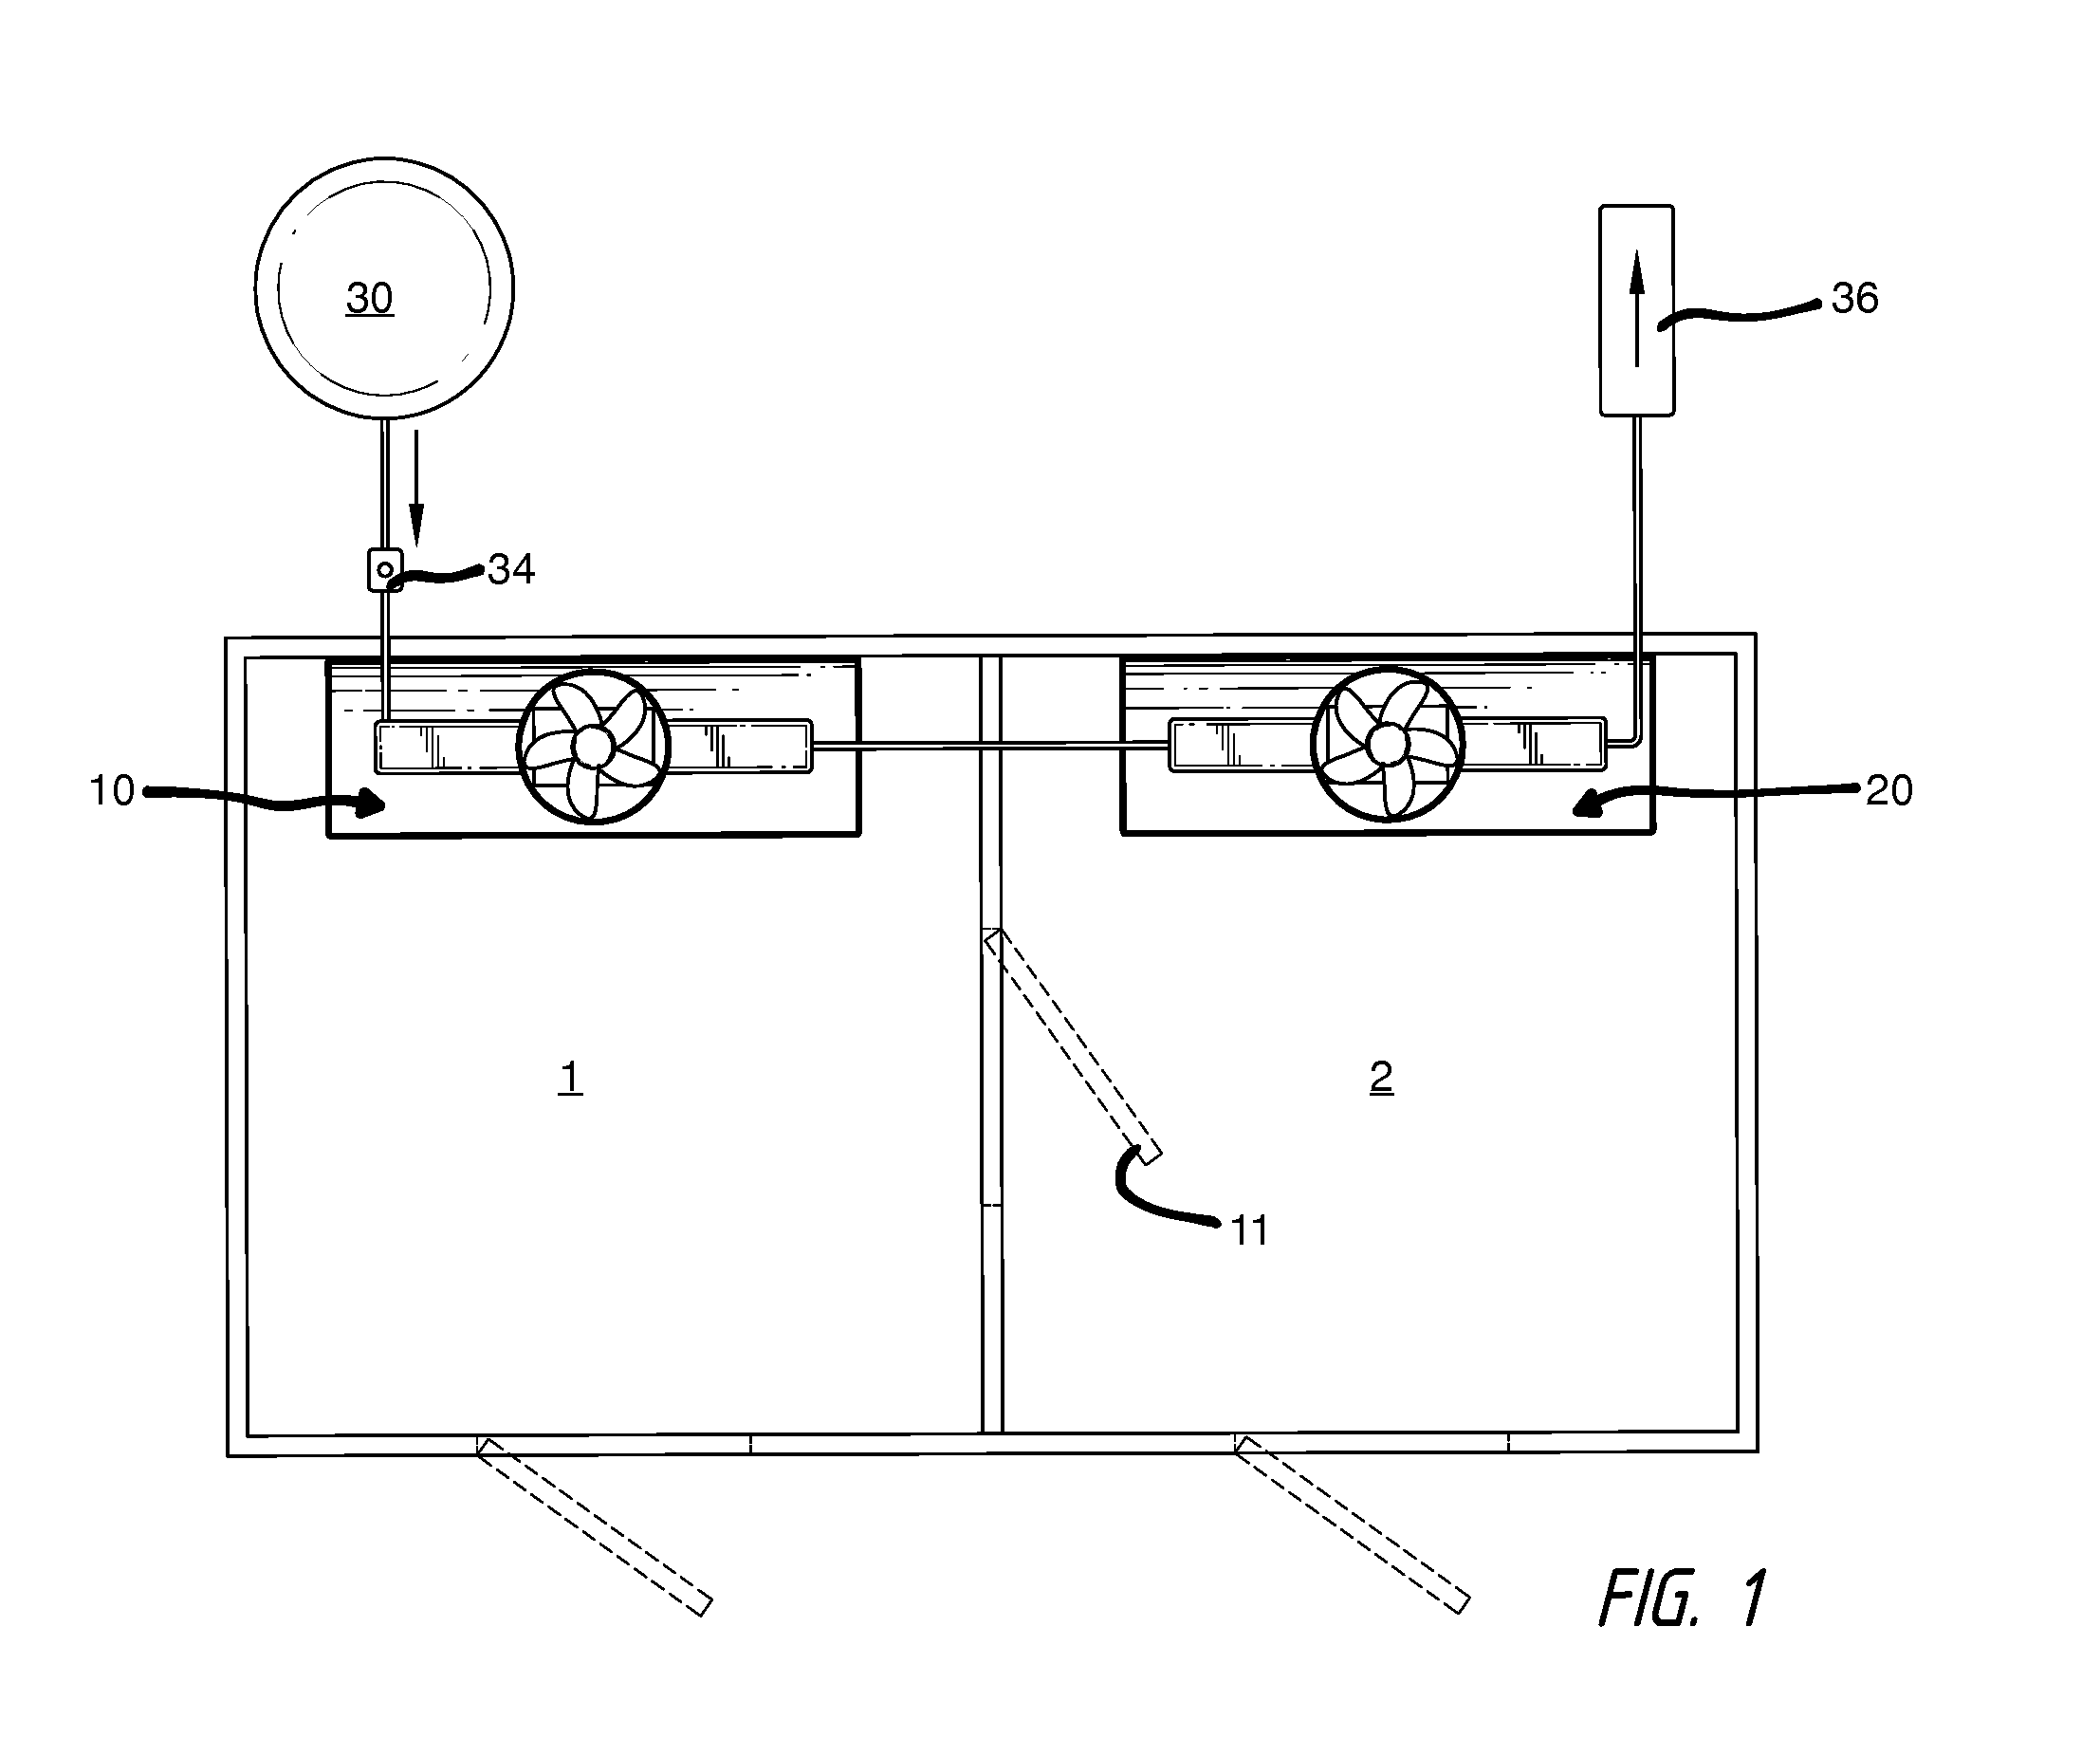 Apparatus for Uniform Total Body Cryotherapy